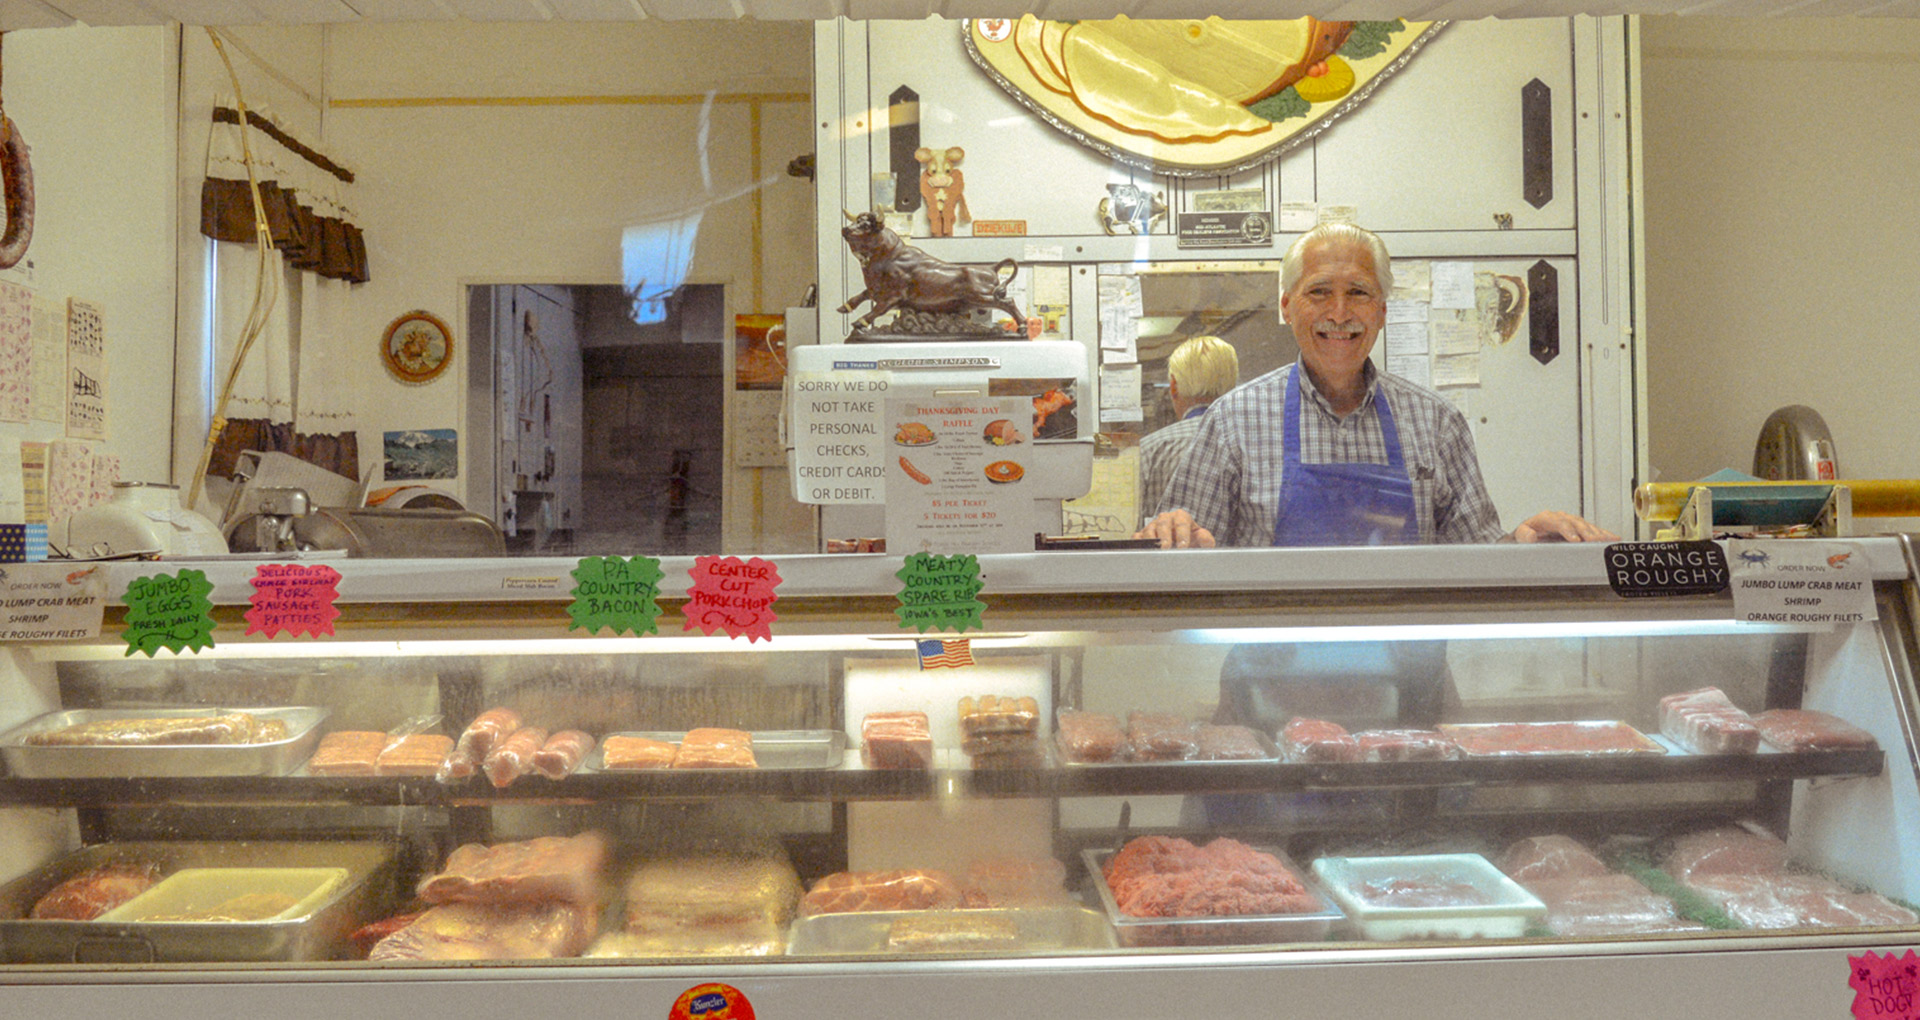 Dudek smiling and standing behind the meat counter greeting customers